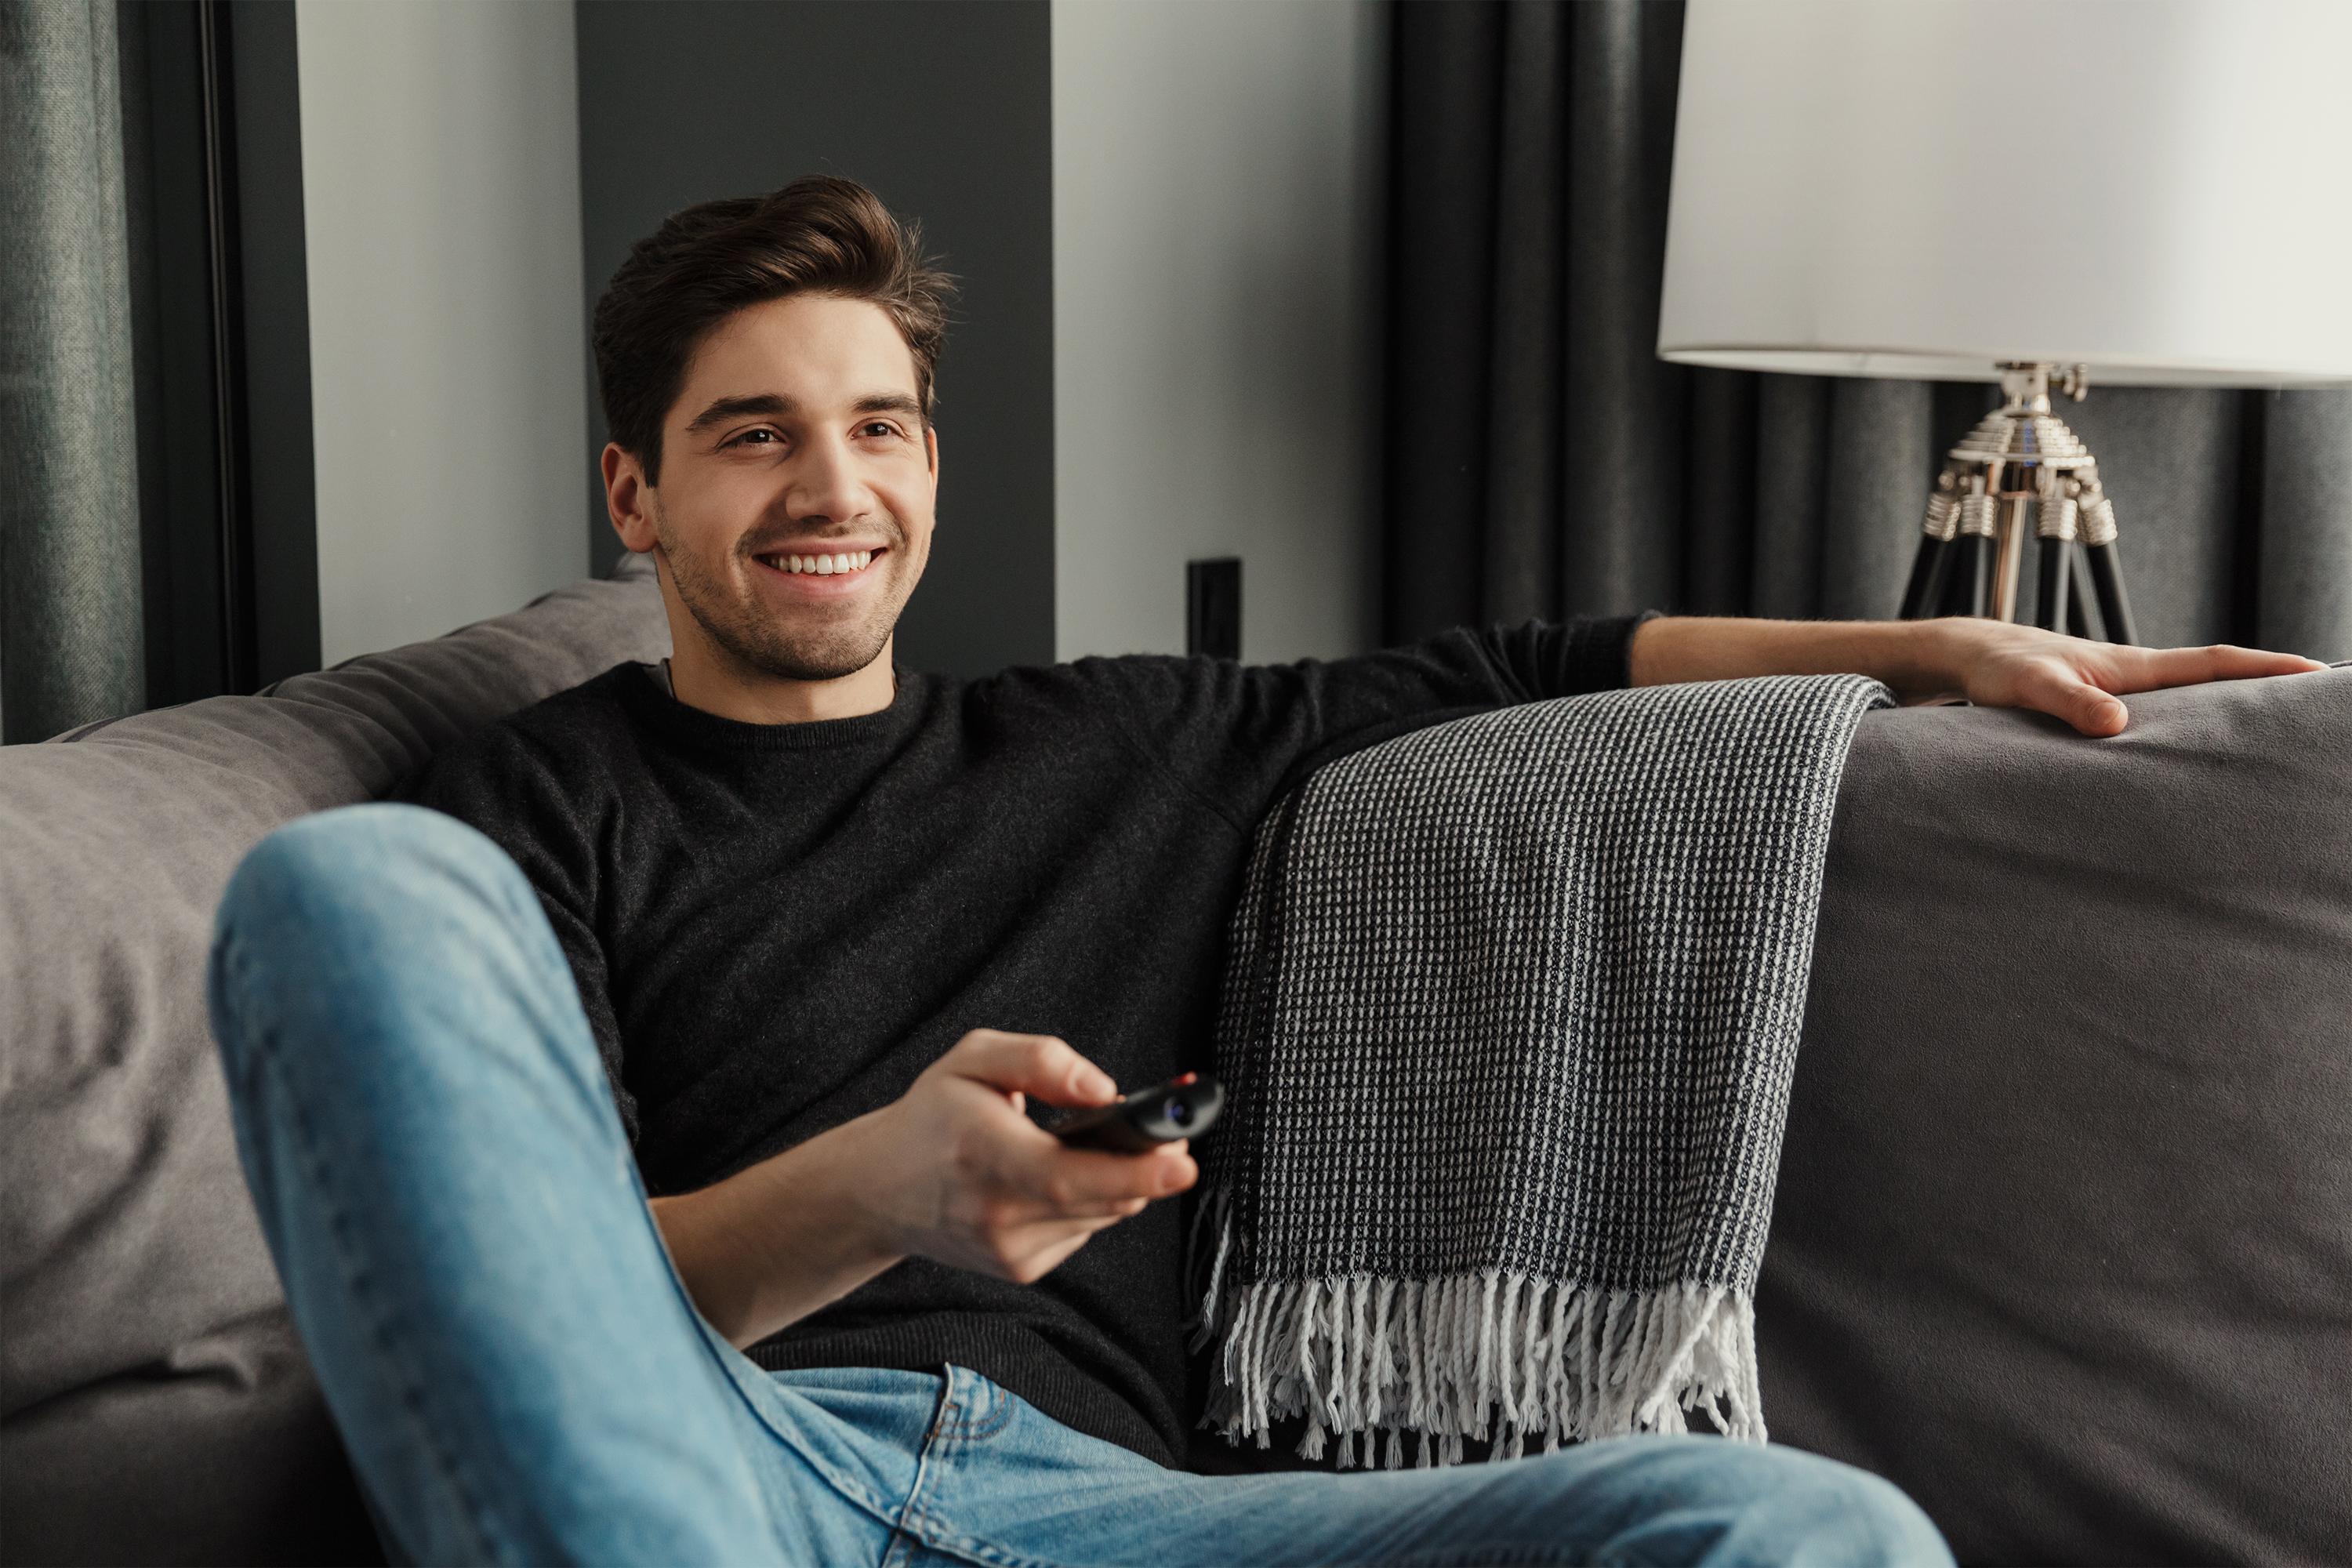 Man watching TV on sofa in living room